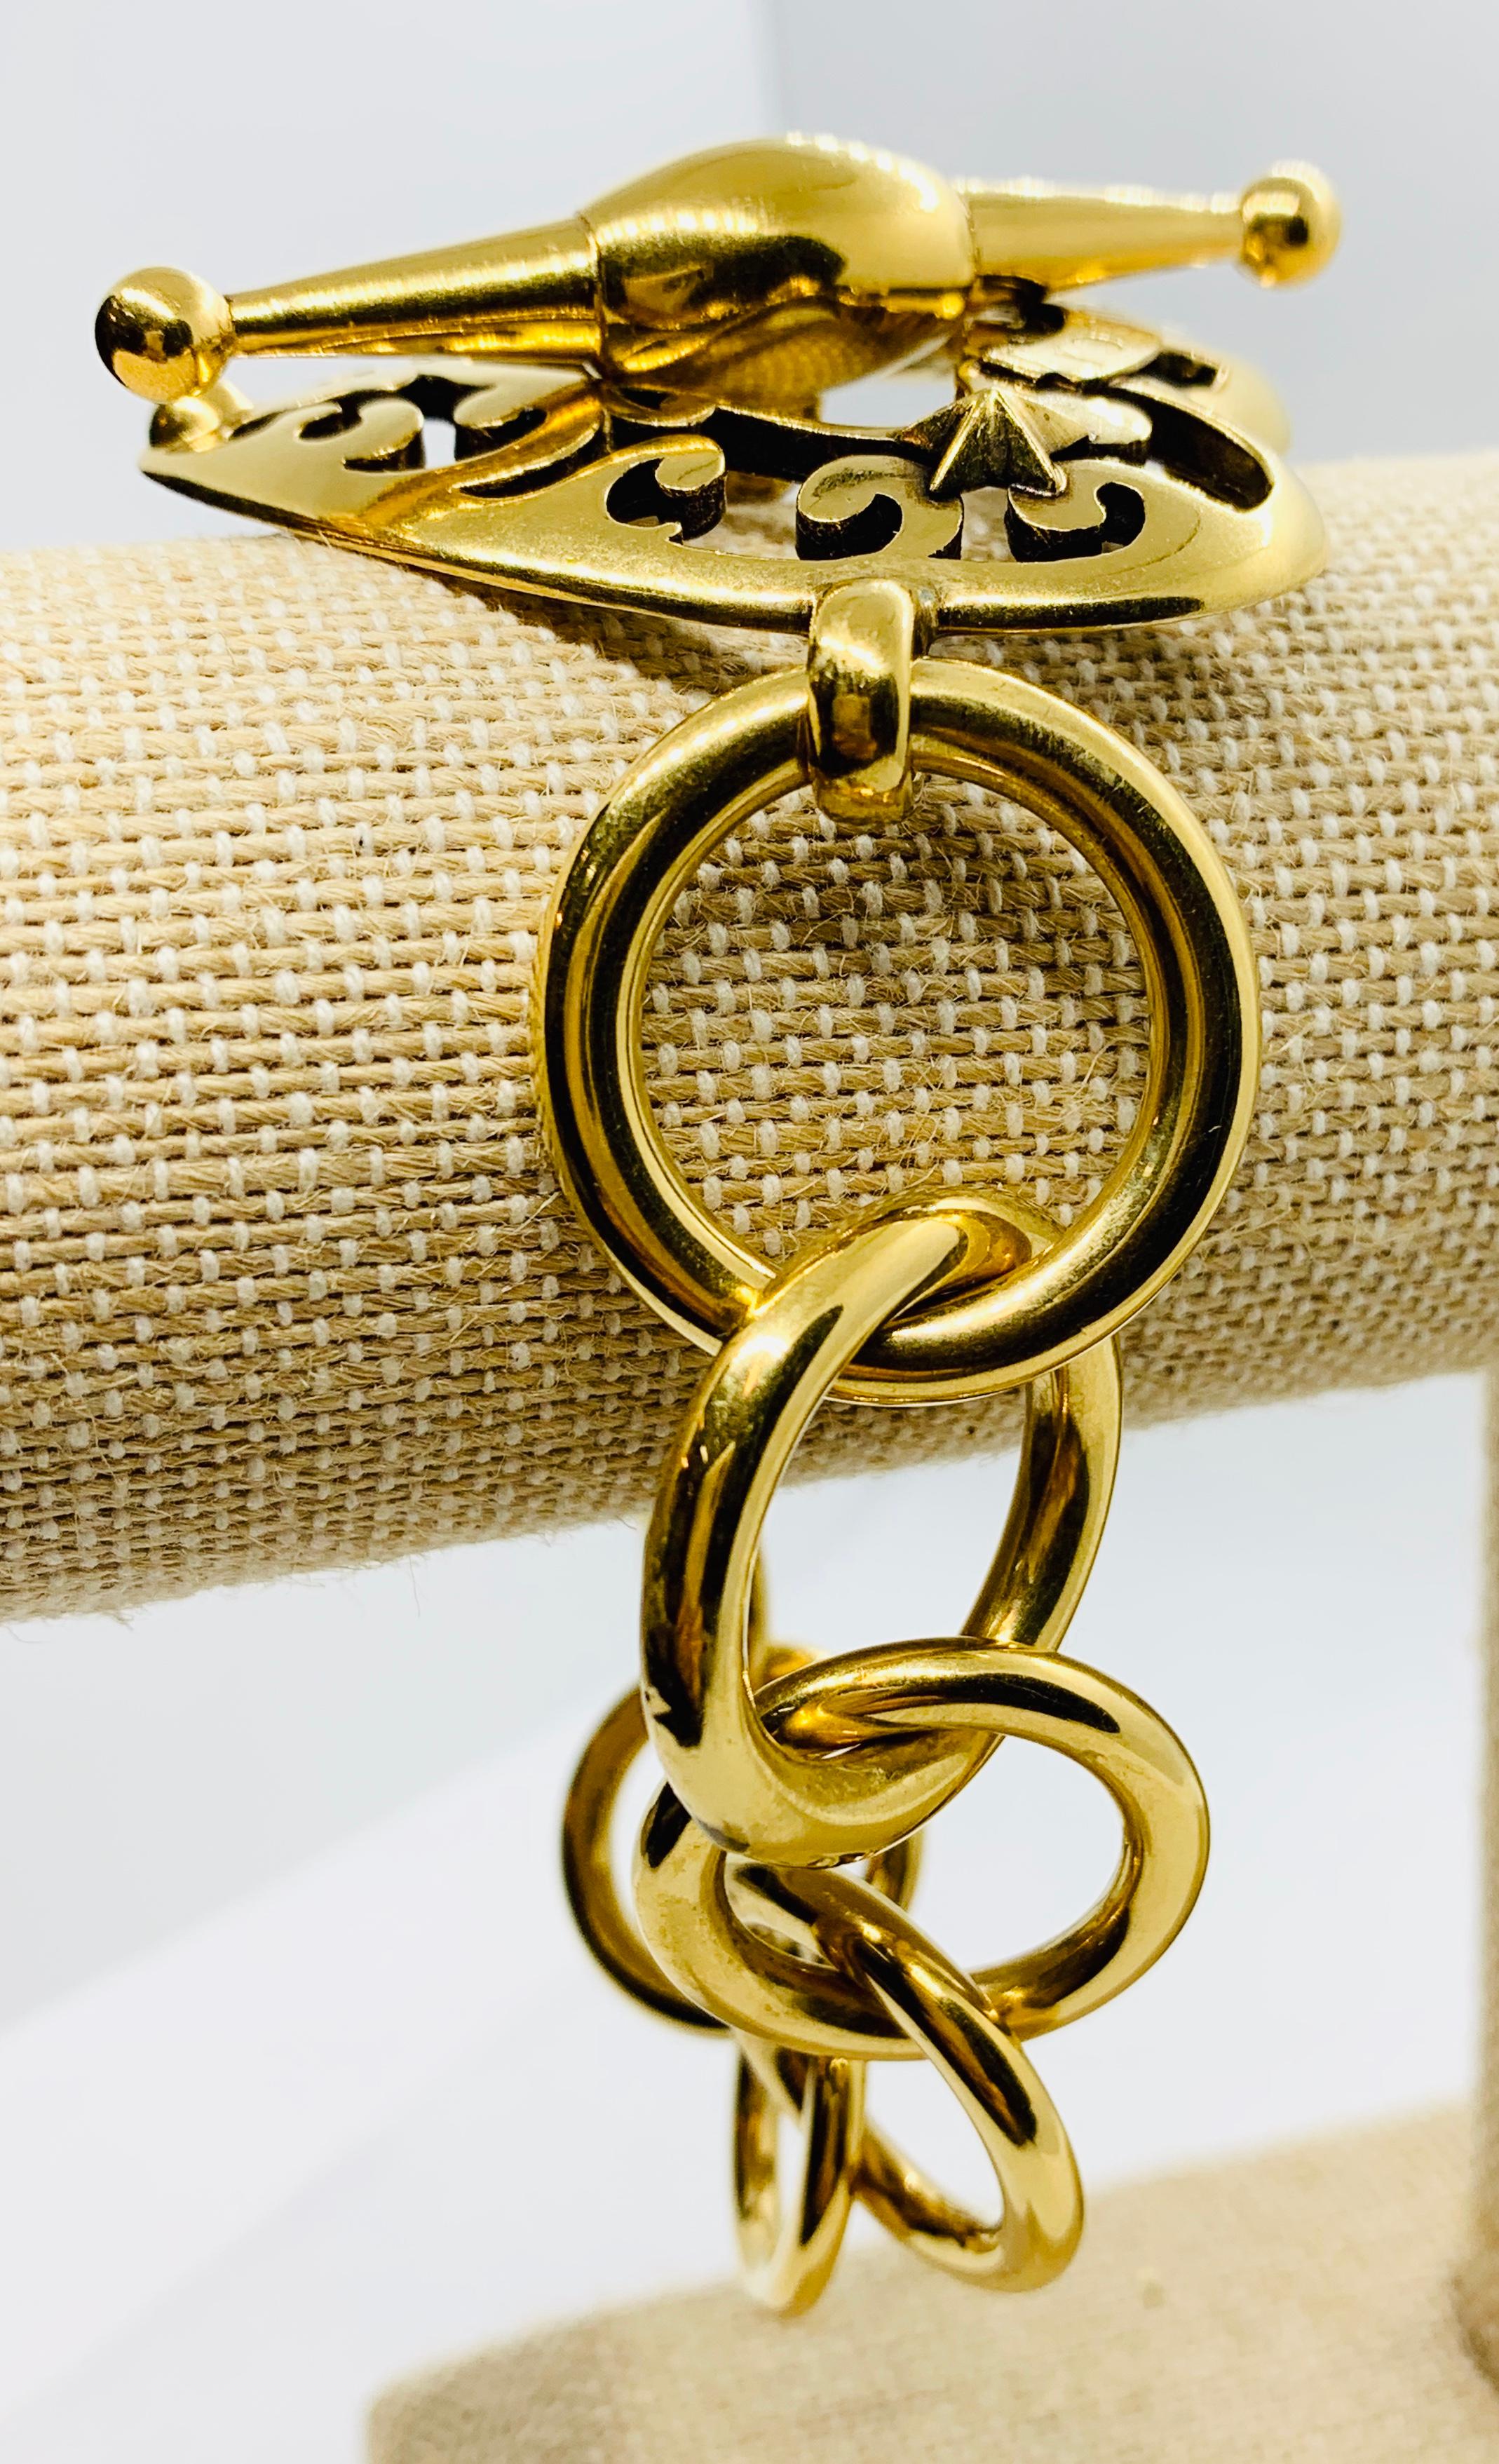 Gucci 18 Karat Gold Link Bracelet with Toggle Clasp & Heart Shaped Center Piece 9